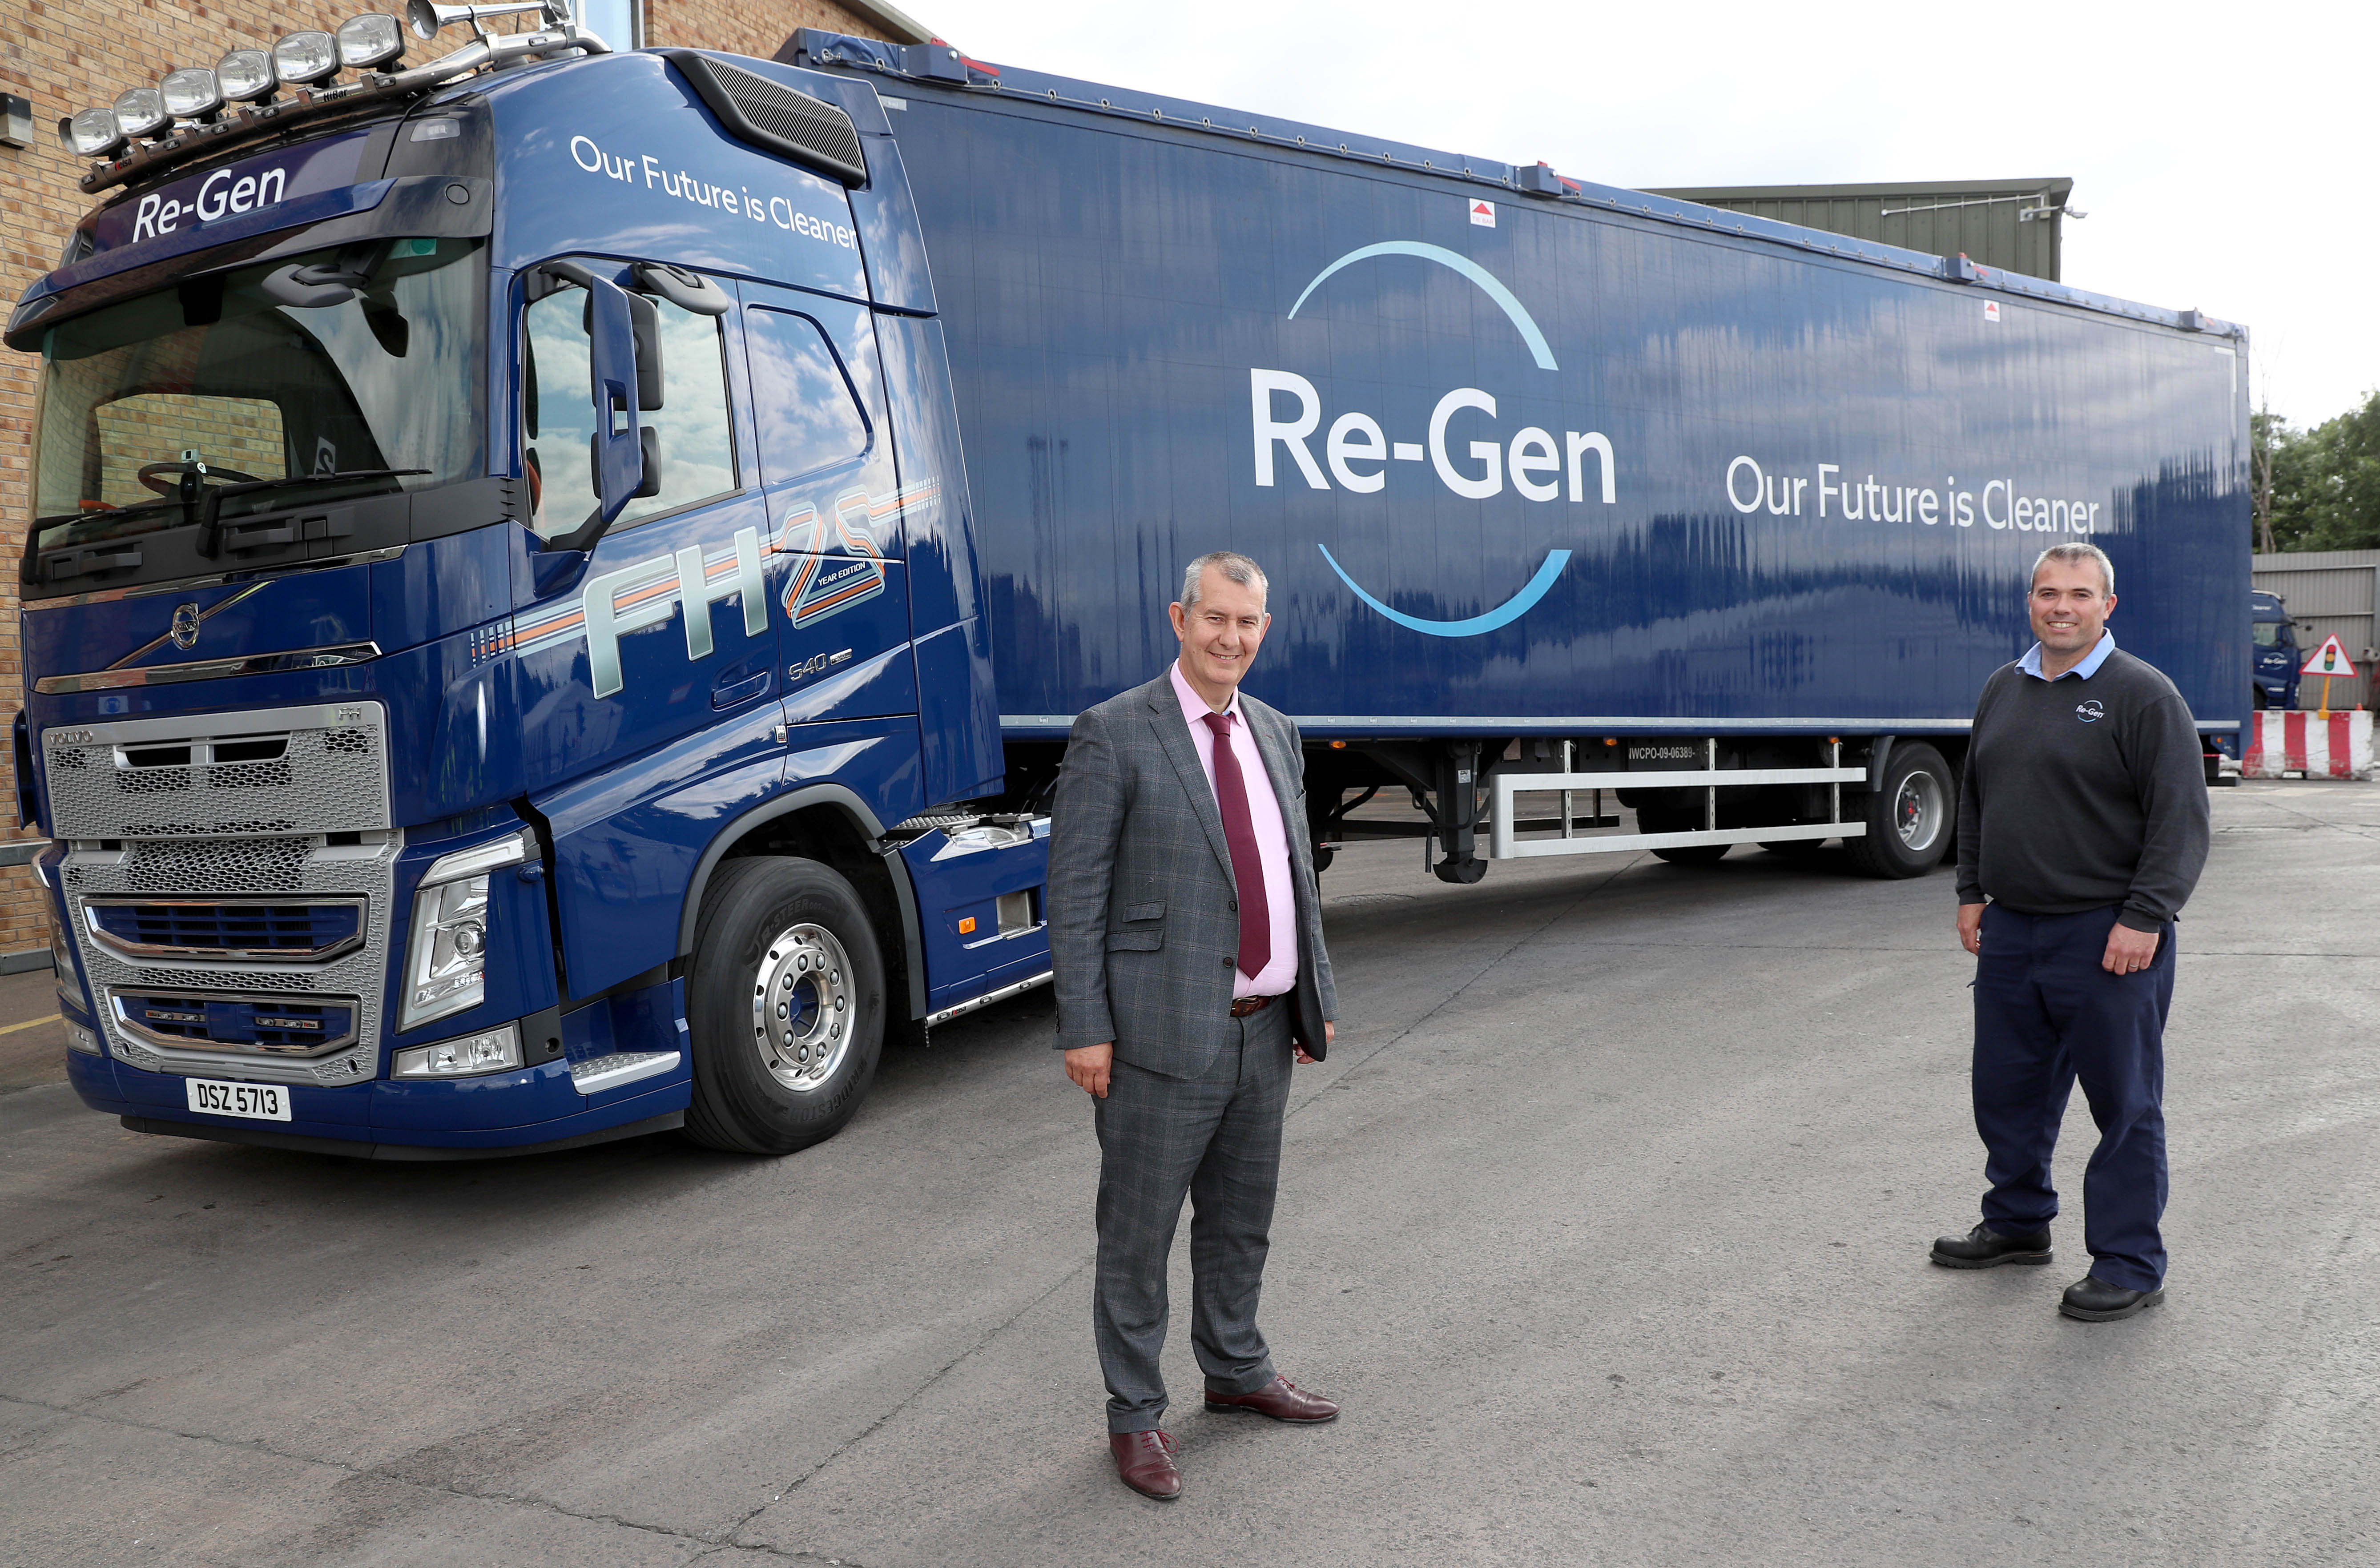 Minister visits Re-Gen Waste Recycling Facility in Newry